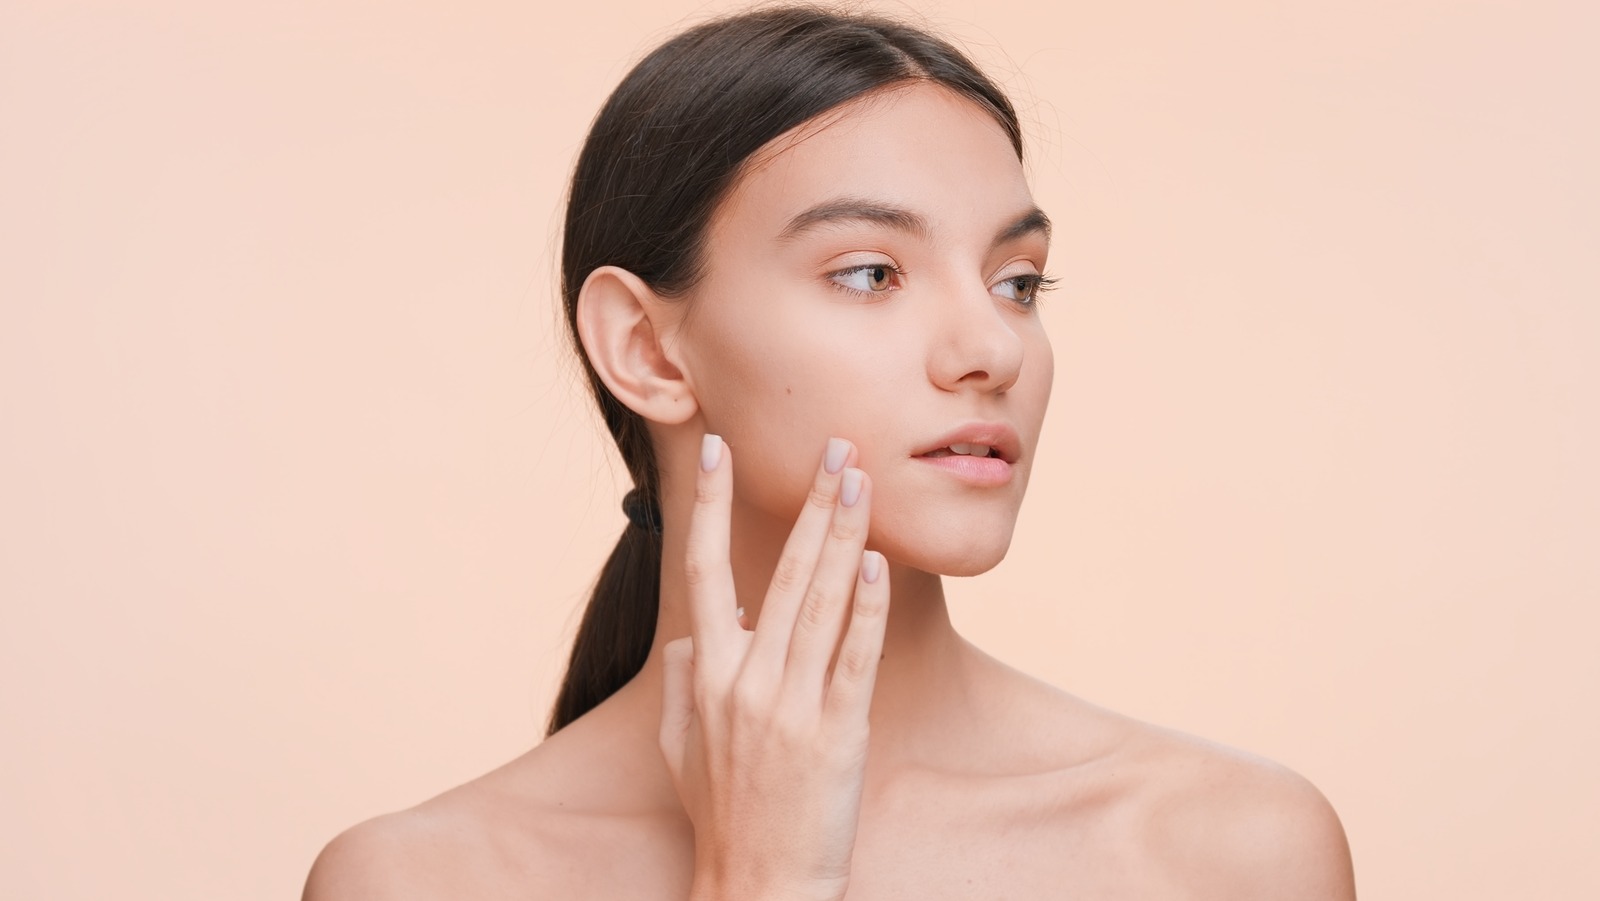 Jaw surgeon debunks 'mewing' beauty trend